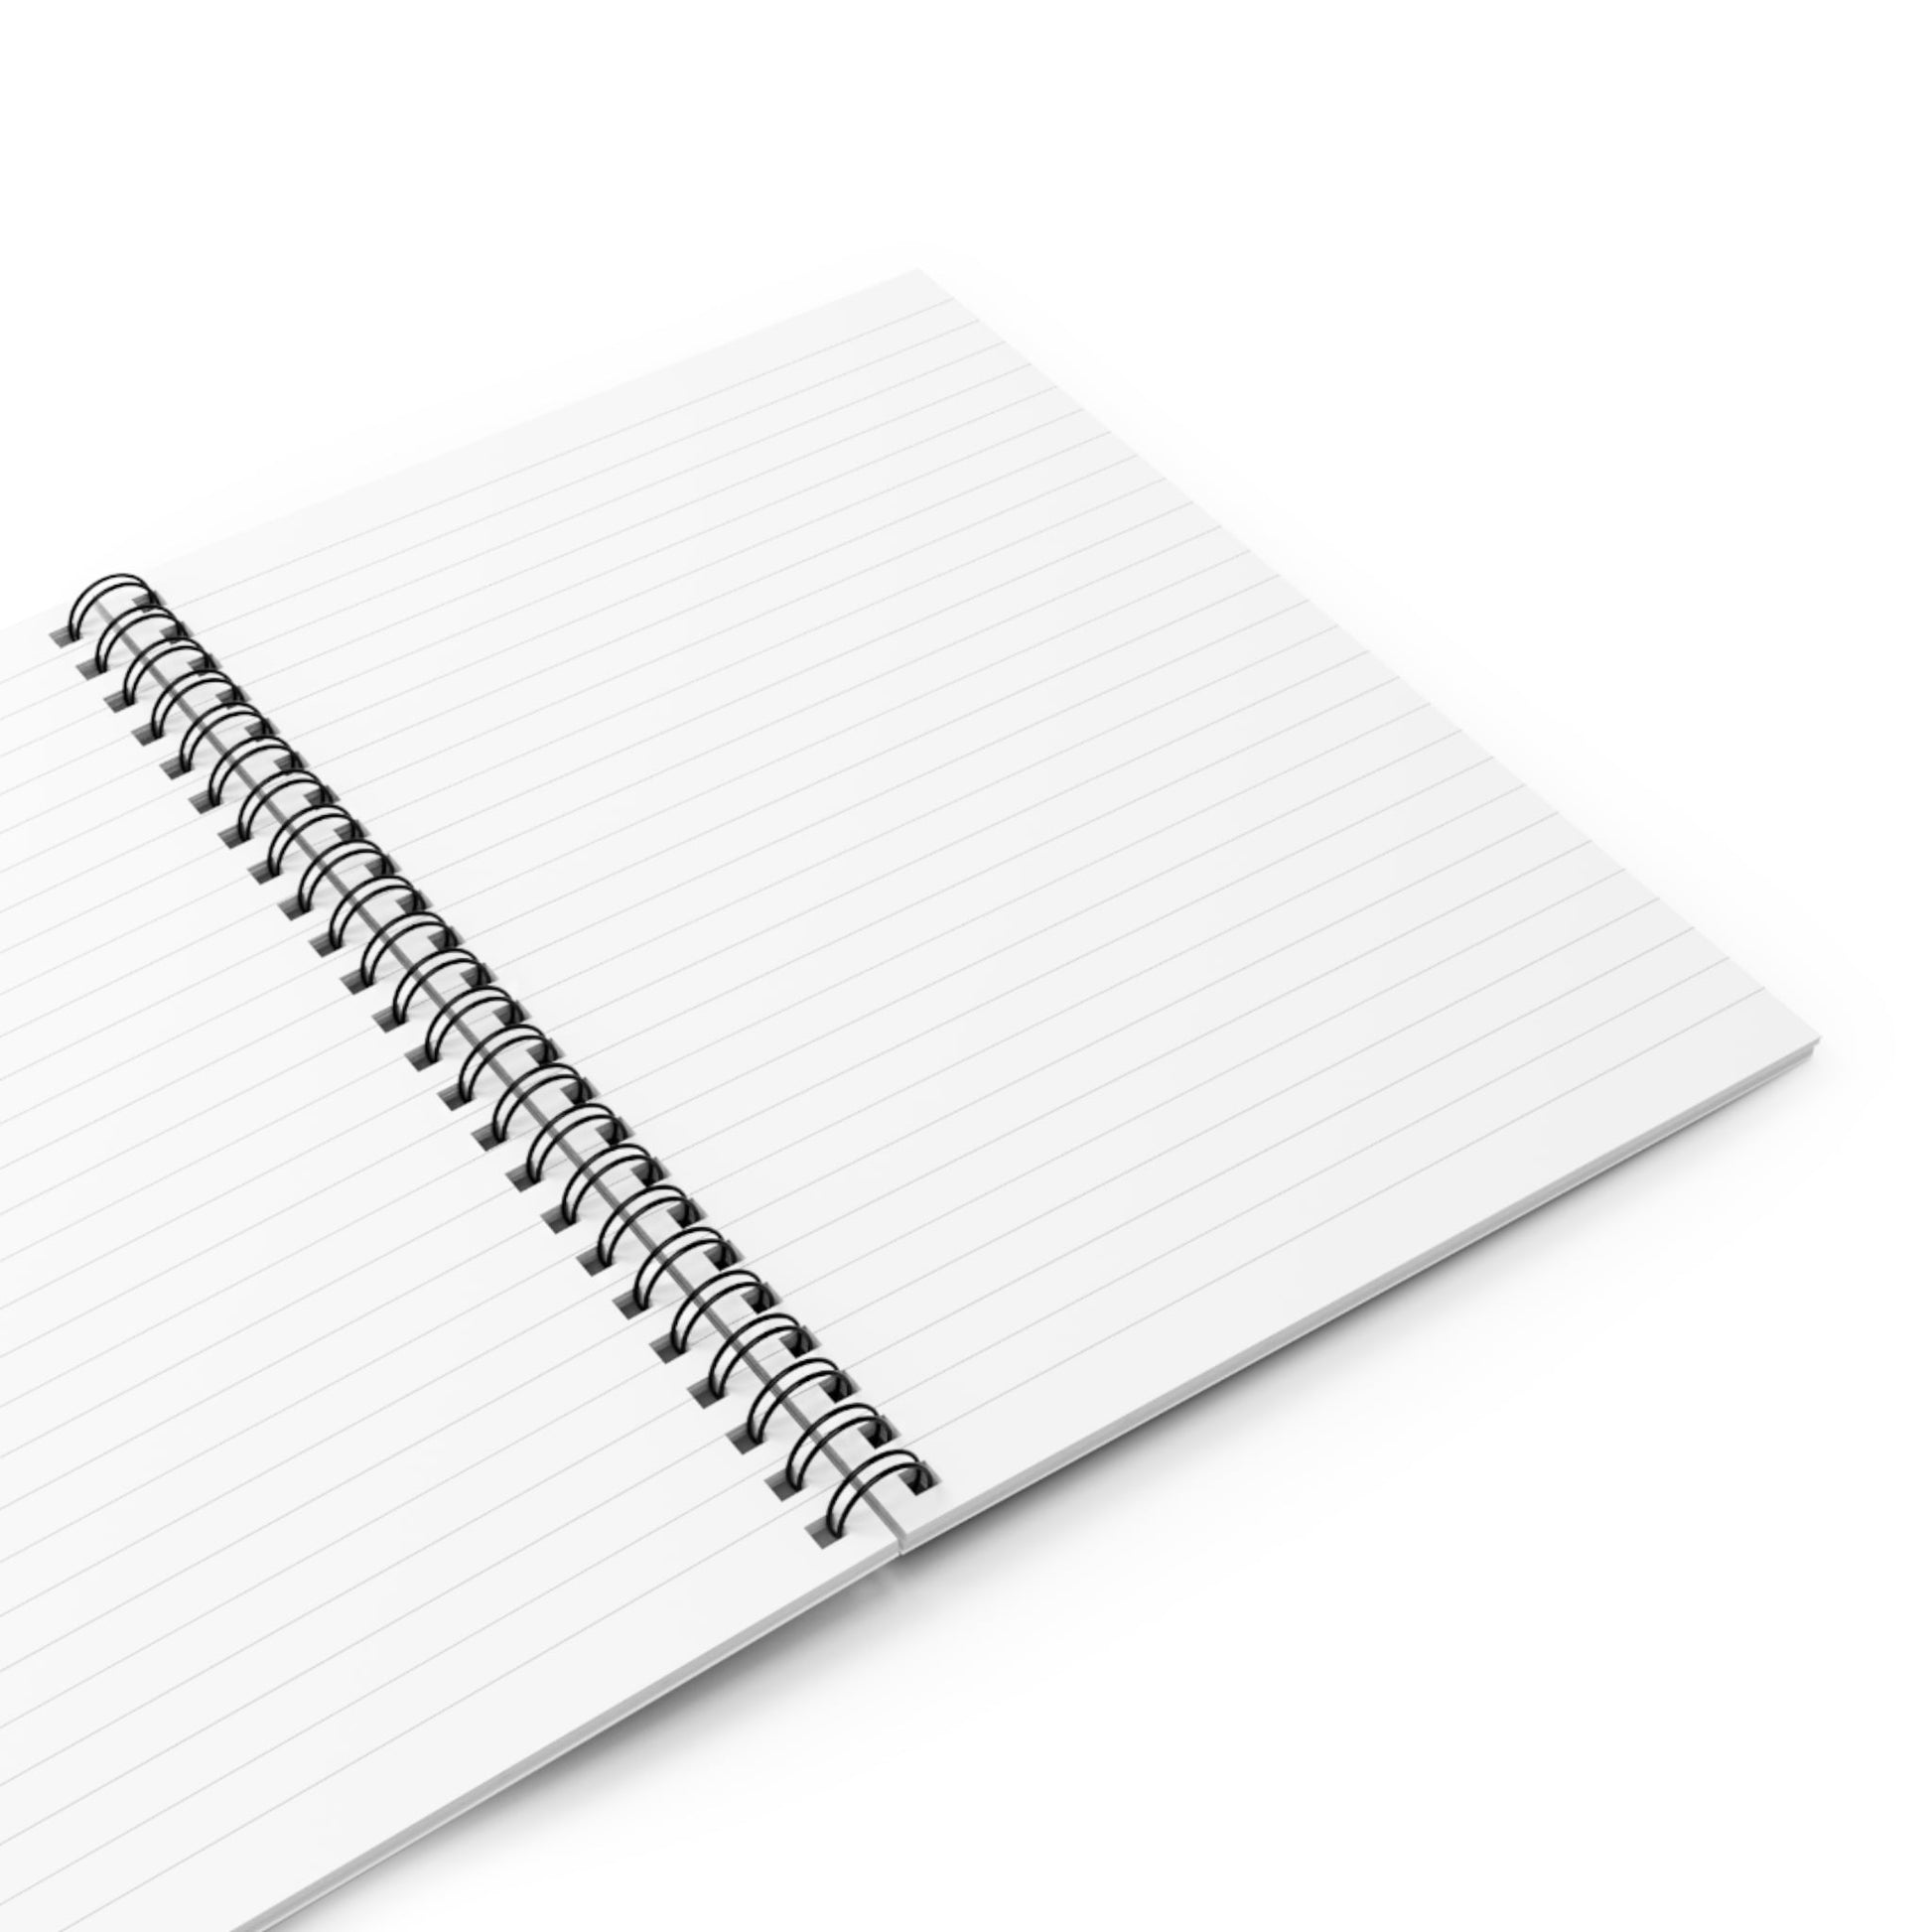 Spiral Notebook with Japanese Mountain Cover Opened with Blank White College Ruled Pages